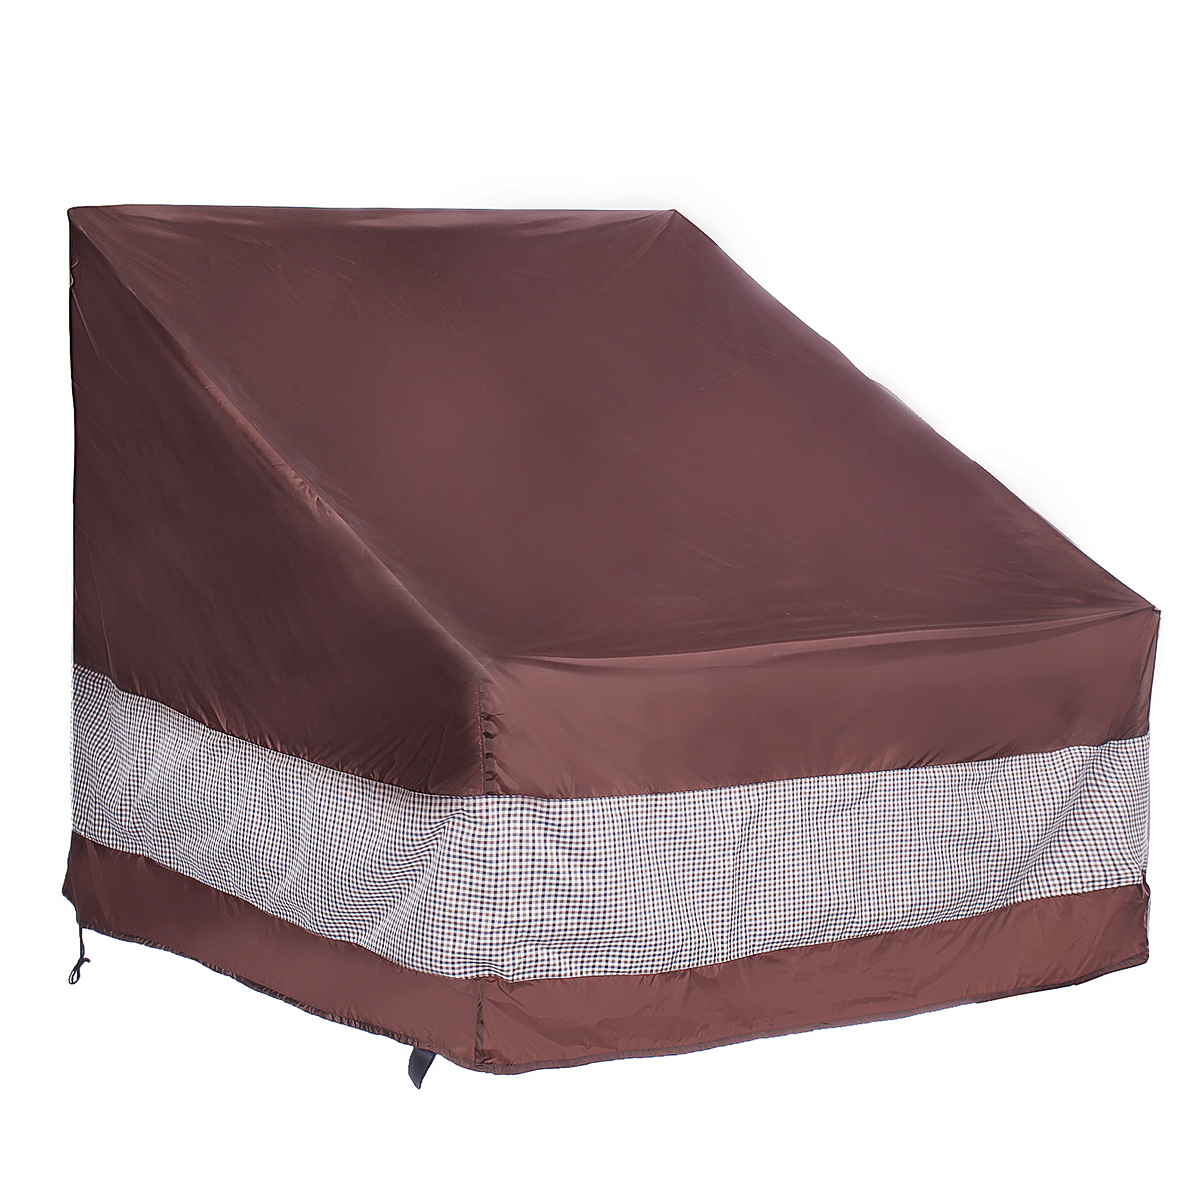 Outdoor-Patio-Furniture-Cover-Waterproof-Case-Dust-proof-Furniture-Chair-Sofa-Covers-Garden-UV-Sun-P-1780051-1